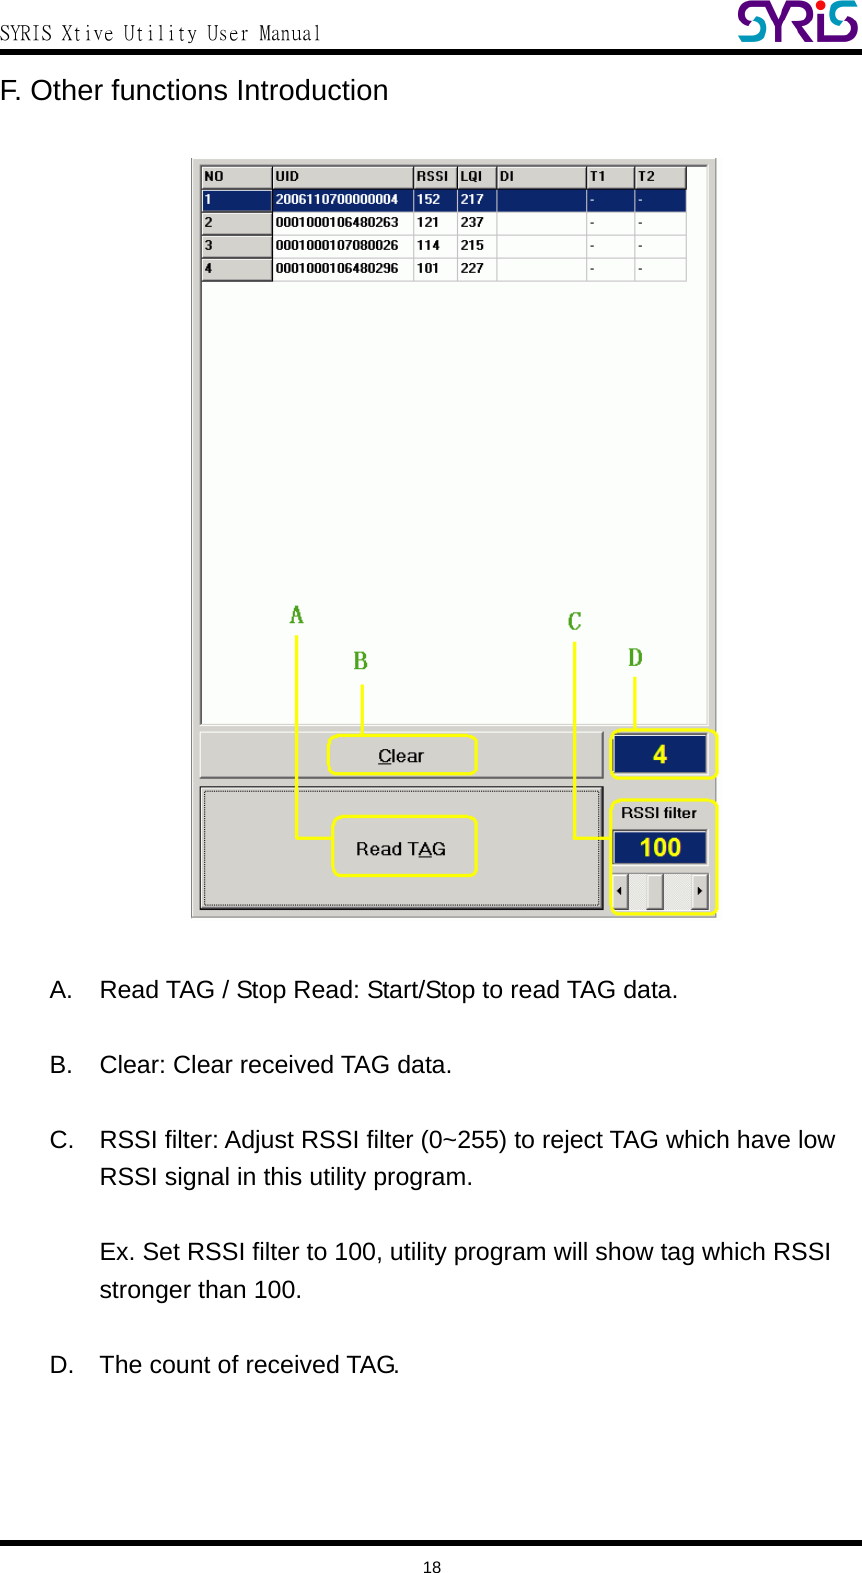  SYRIS Xtive Utility User Manual  F. Other functions Introduction     A.  Read TAG / Stop Read: Start/Stop to read TAG data.  B.  Clear: Clear received TAG data.  C.  RSSI filter: Adjust RSSI filter (0~255) to reject TAG which have low RSSI signal in this utility program.  Ex. Set RSSI filter to 100, utility program will show tag which RSSI stronger than 100.  D.  The count of received TAG.   18 